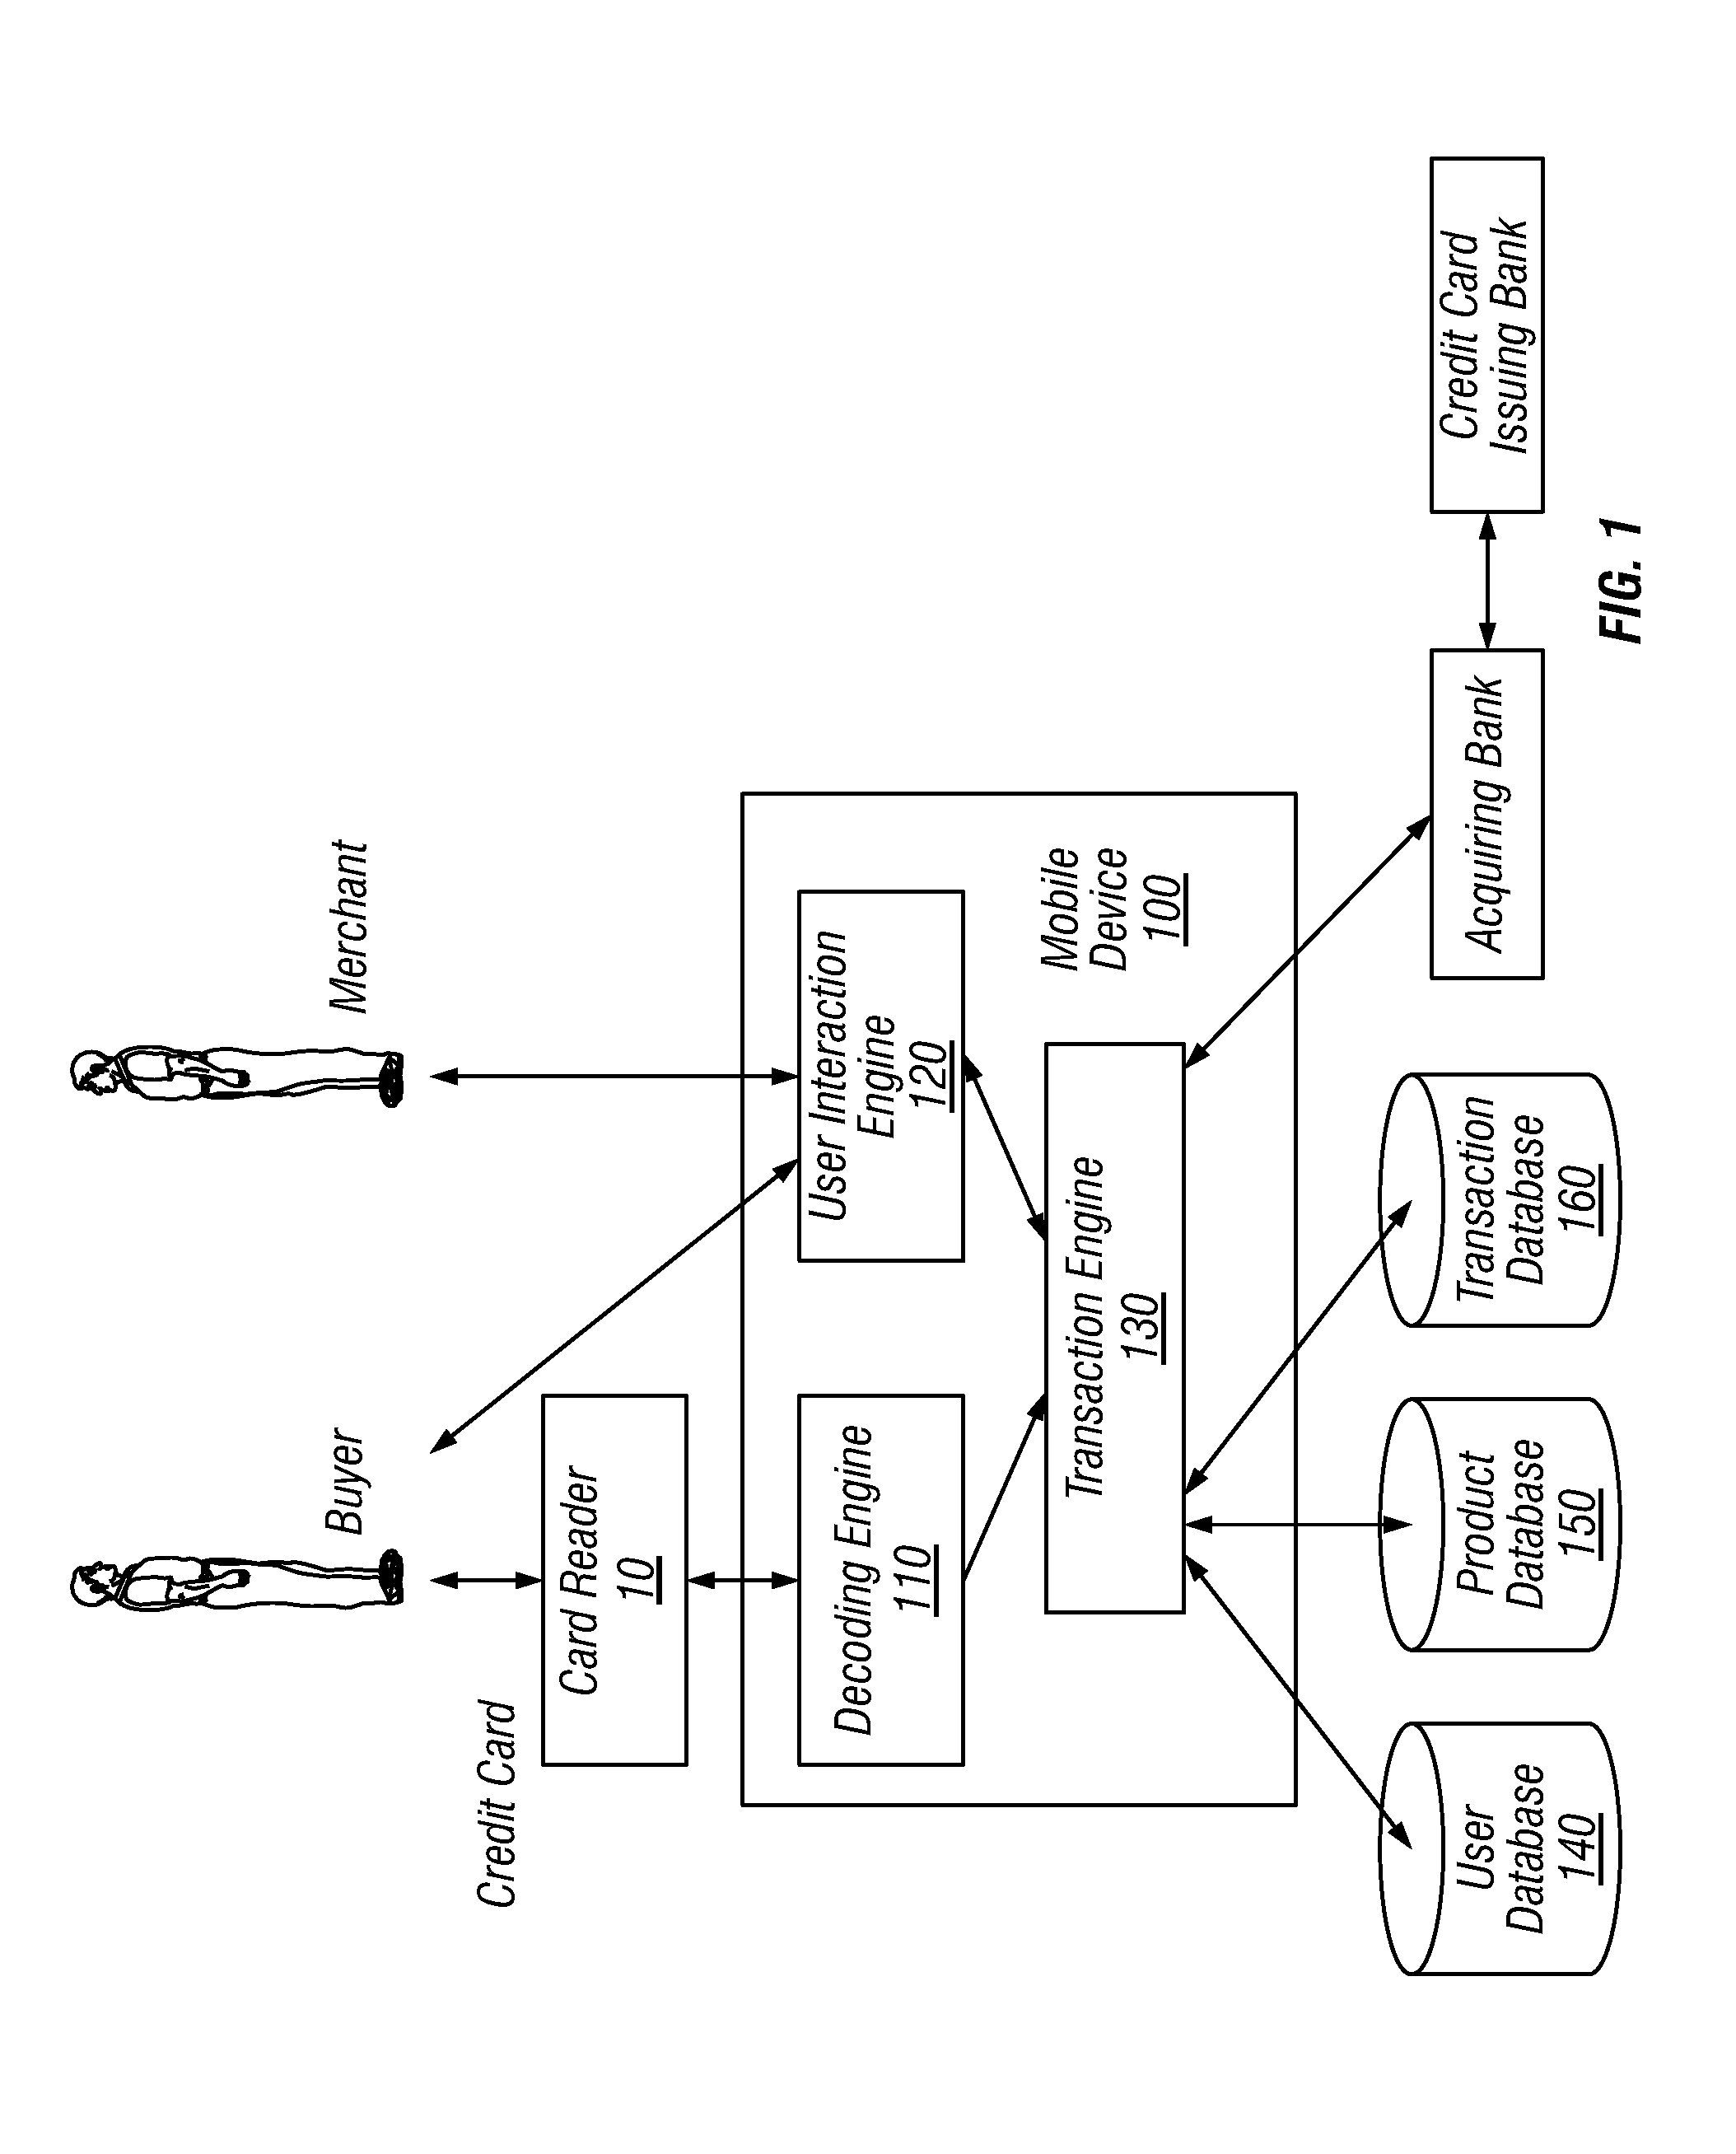 Method of conducting financial transactions